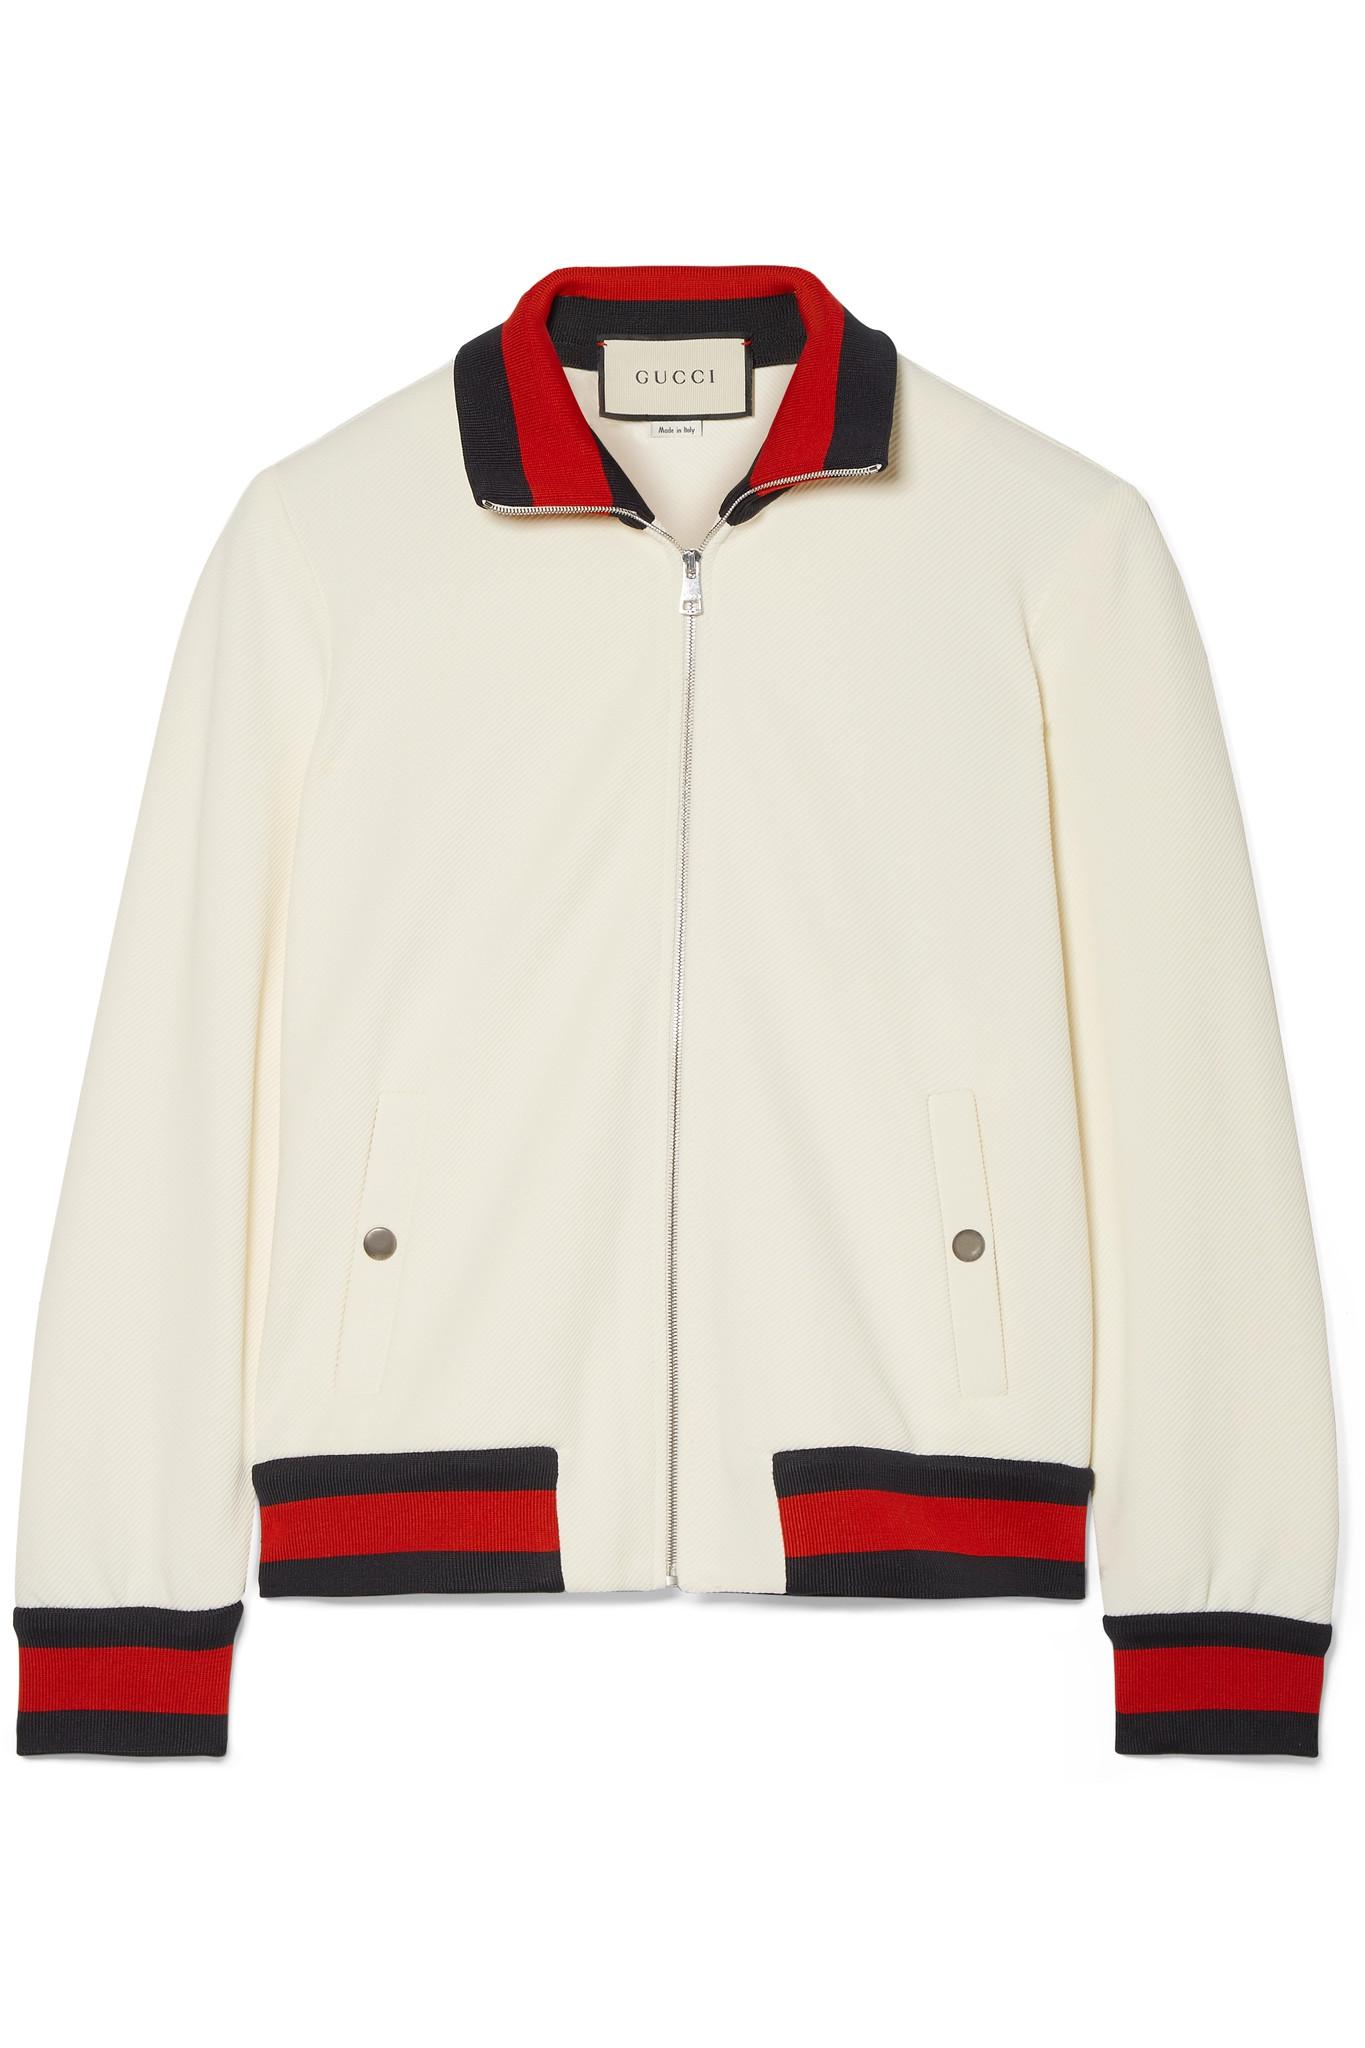 Gucci Twill Bomber Jacket in White | Lyst